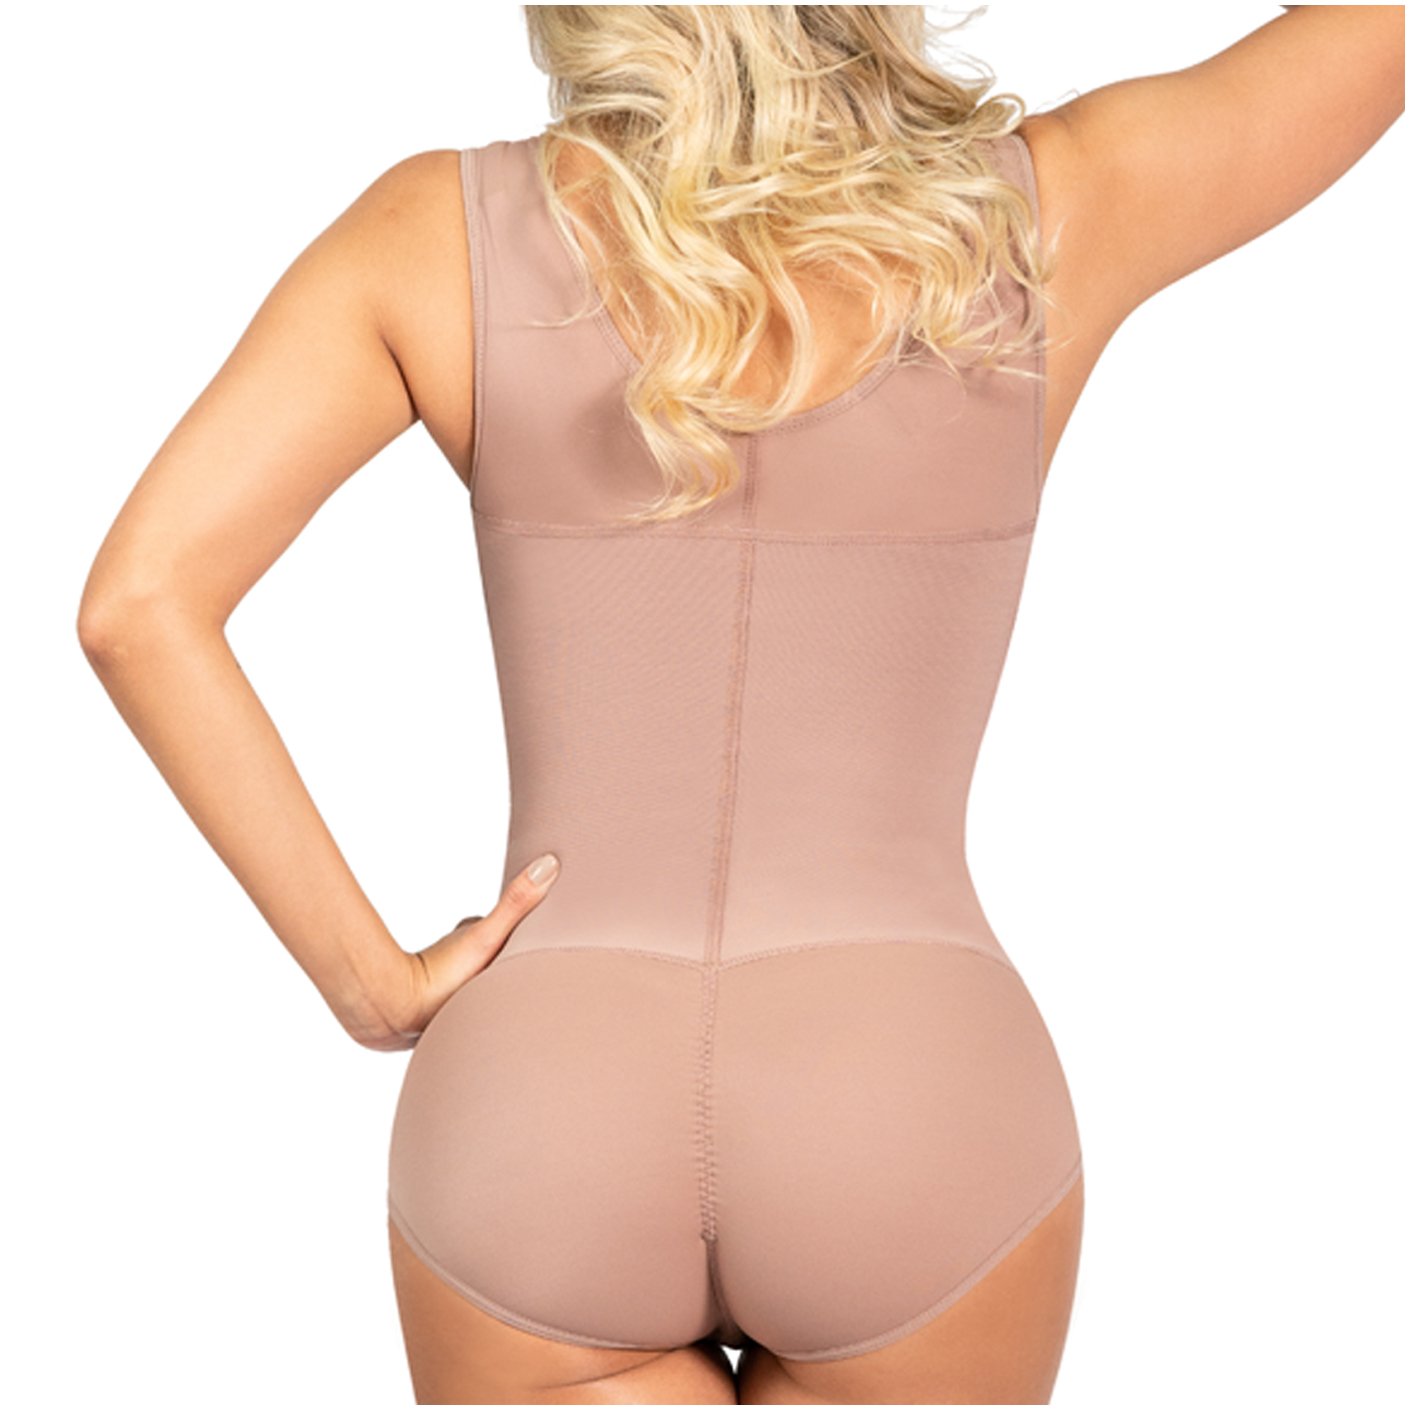 Sonryse 055 | Panty Bodysuit Shapewear with Built-in Bra | Postpartum and Daily Use - fajacolombian